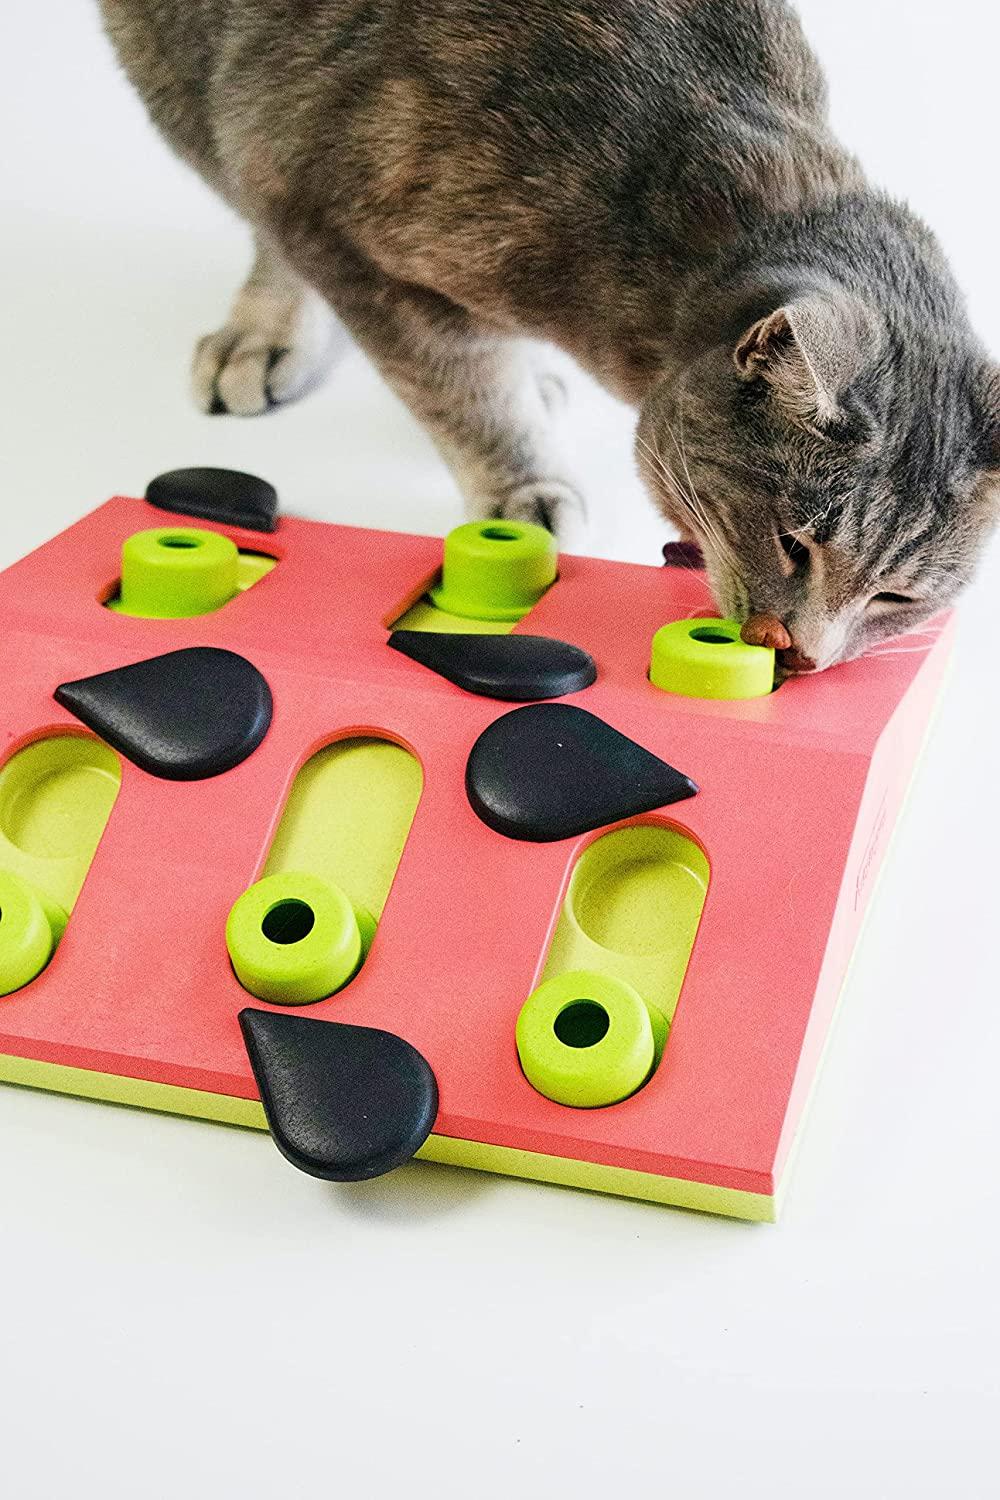 Cat Puzzles - Nina Ottosson Treat Puzzle Games for Dogs & Cats